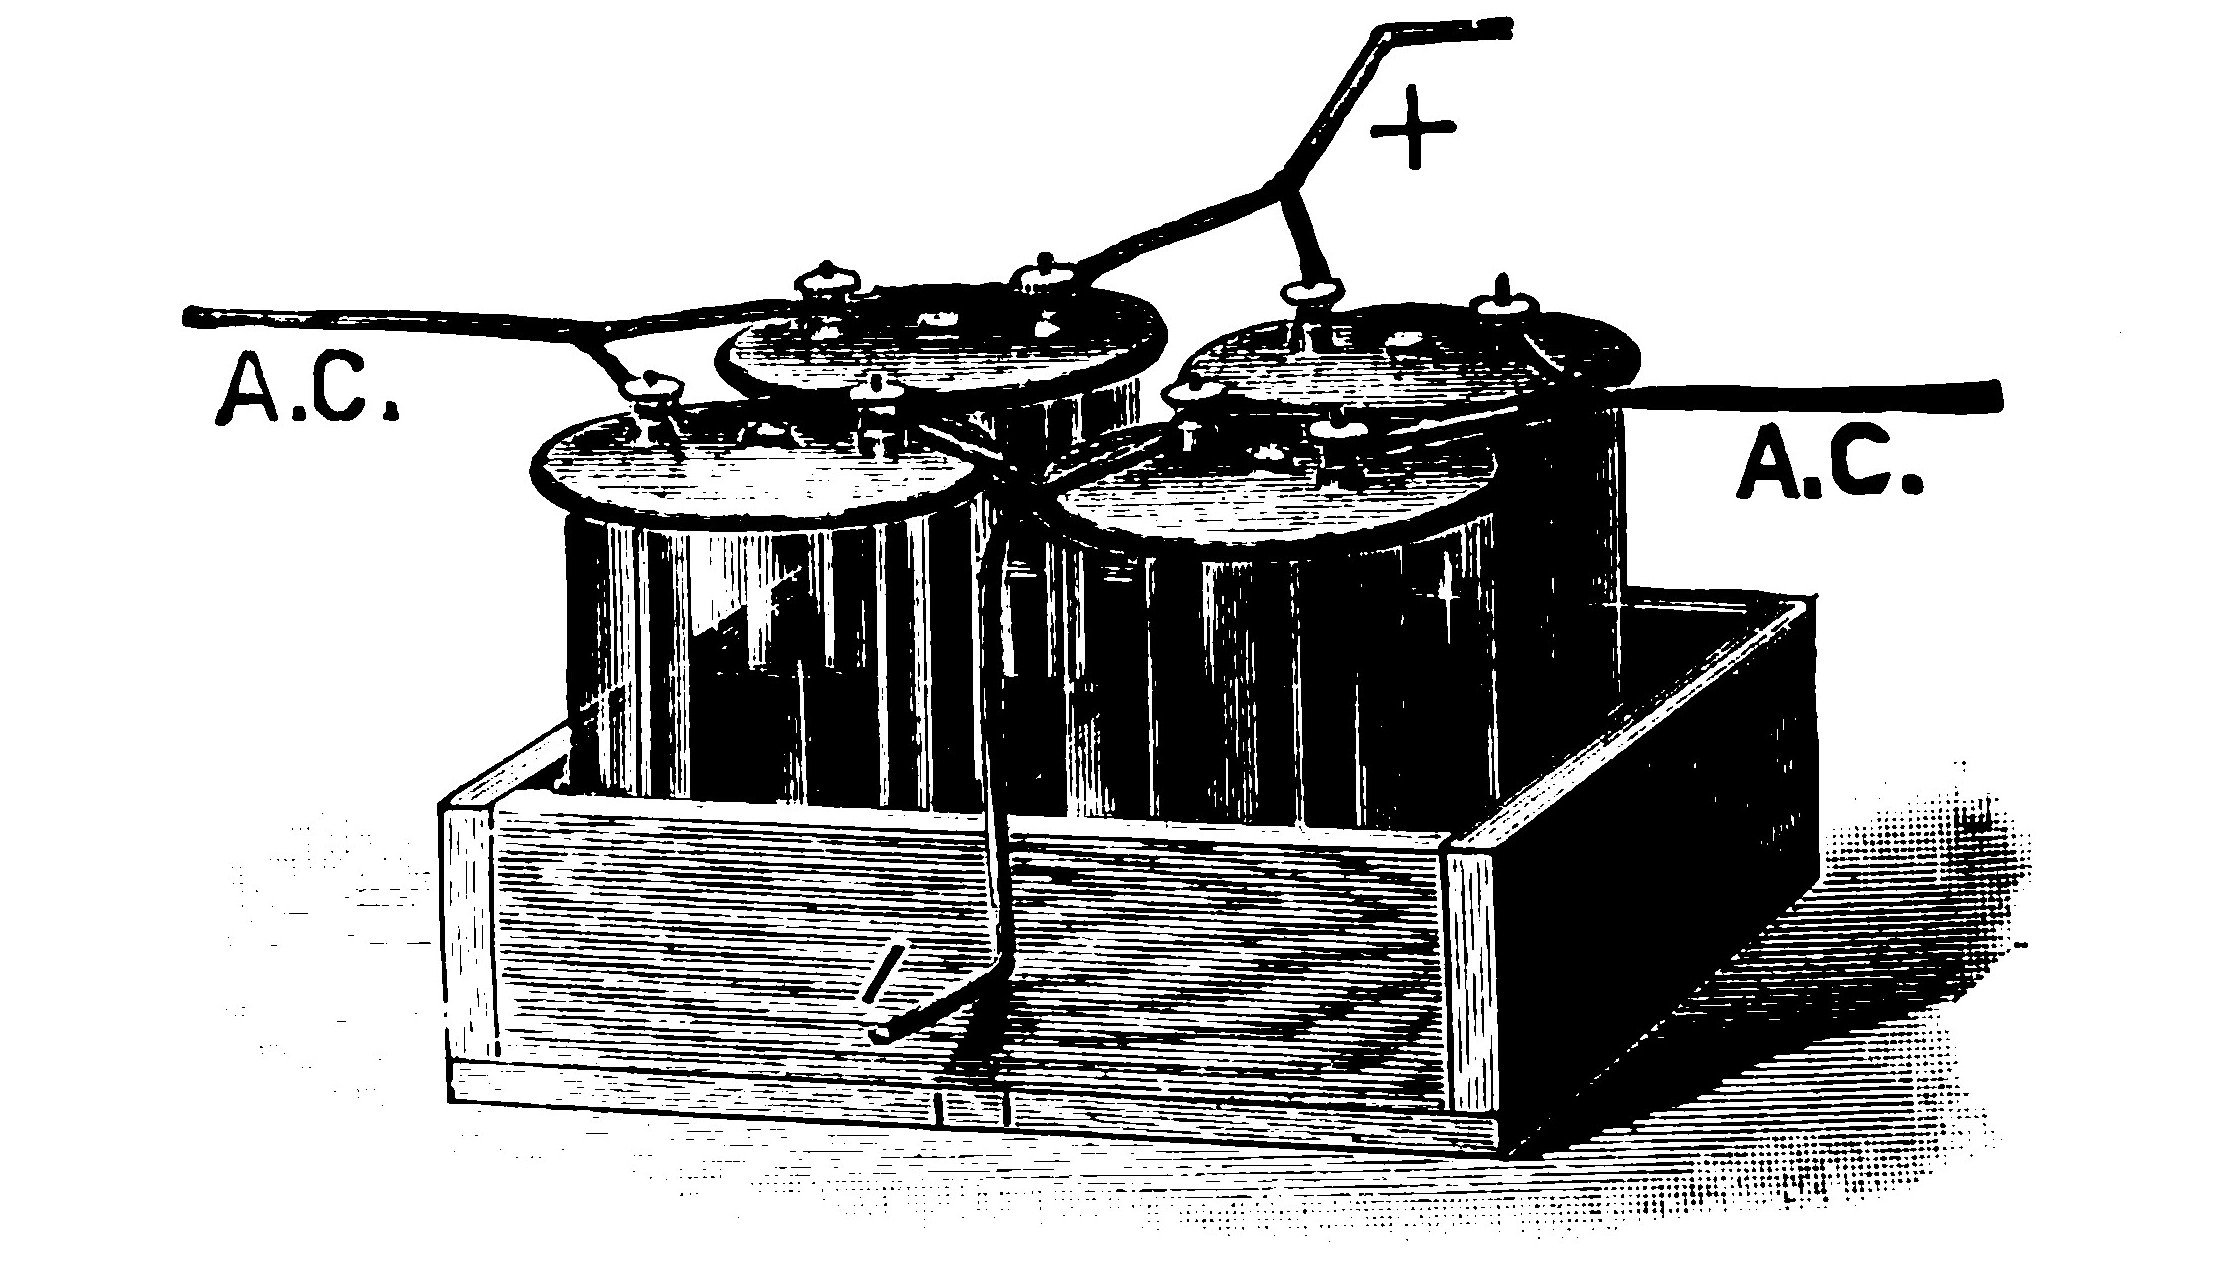 FIG. 57—A Complete Four-Cell Rectifier connected together and Mounted in a Tray.